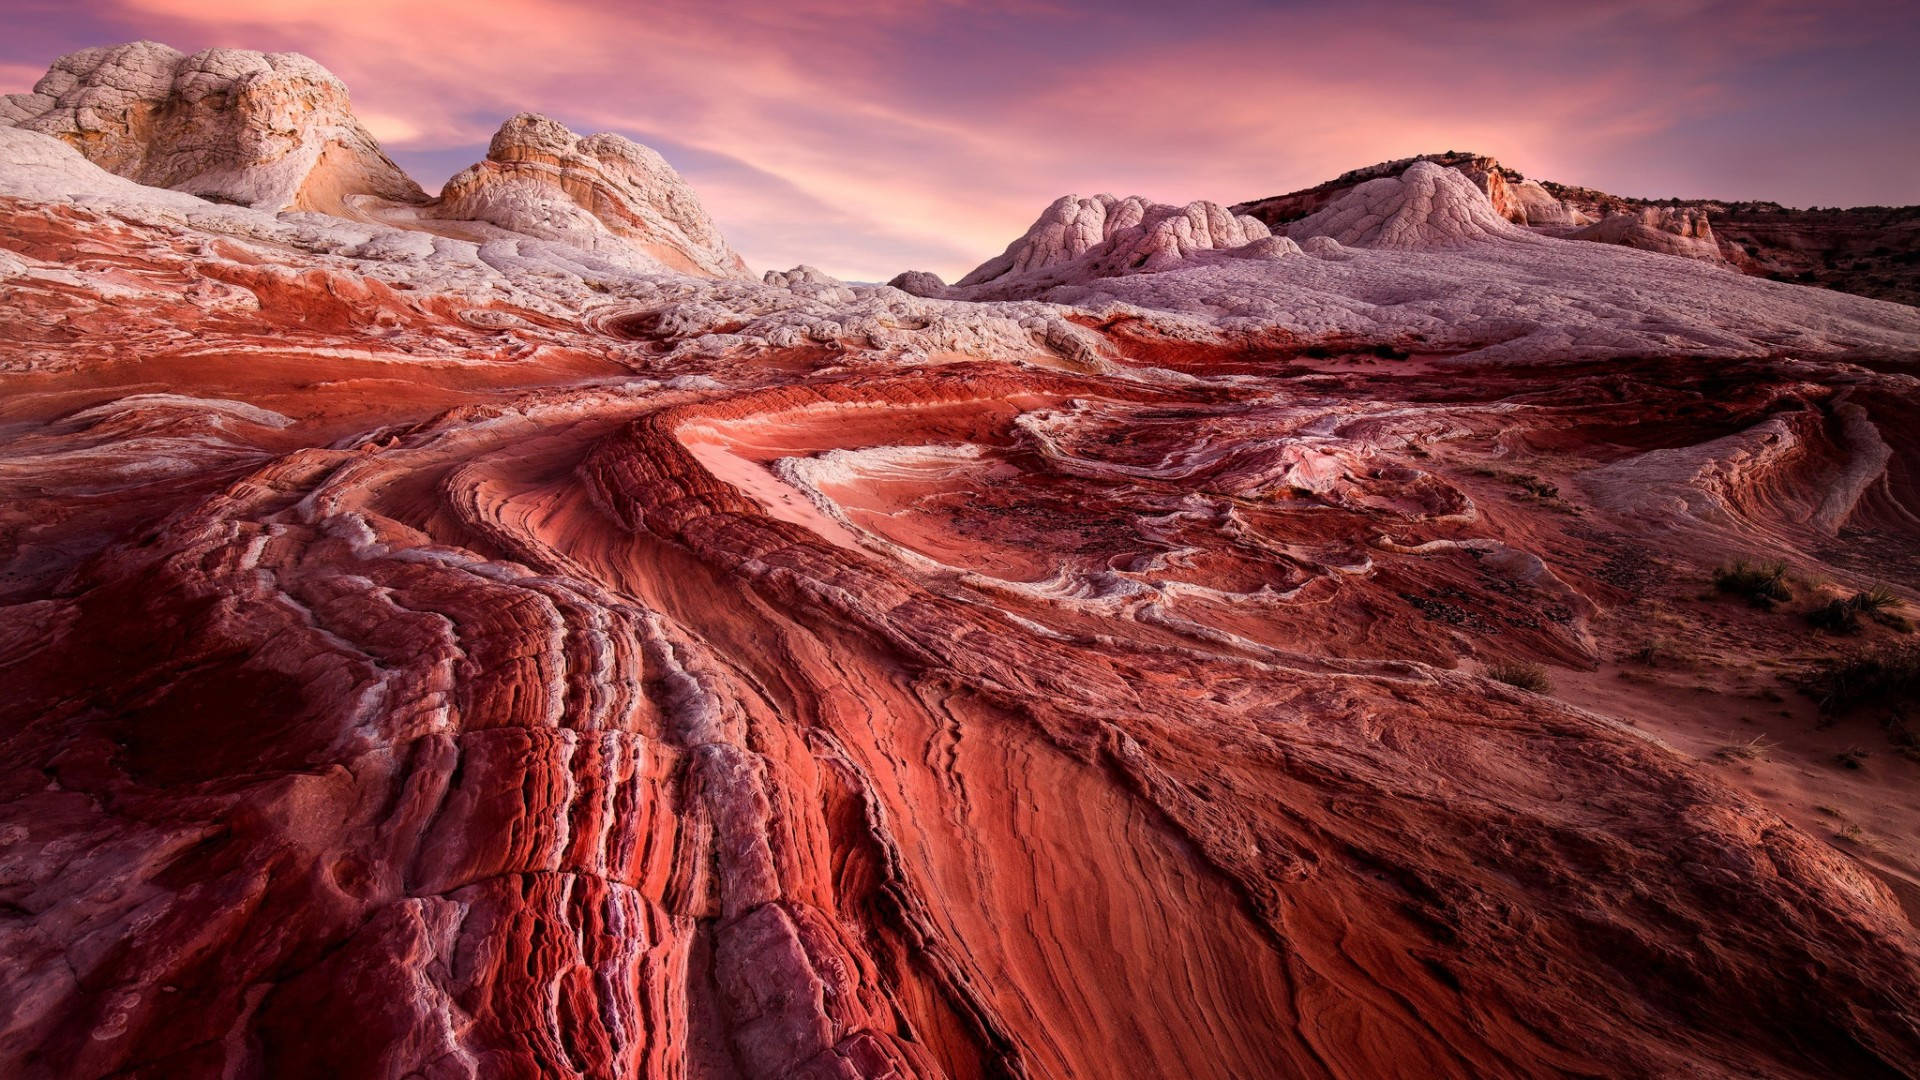 Majestic Red Rock Formations in the Heart of Arizona Desert Wallpaper